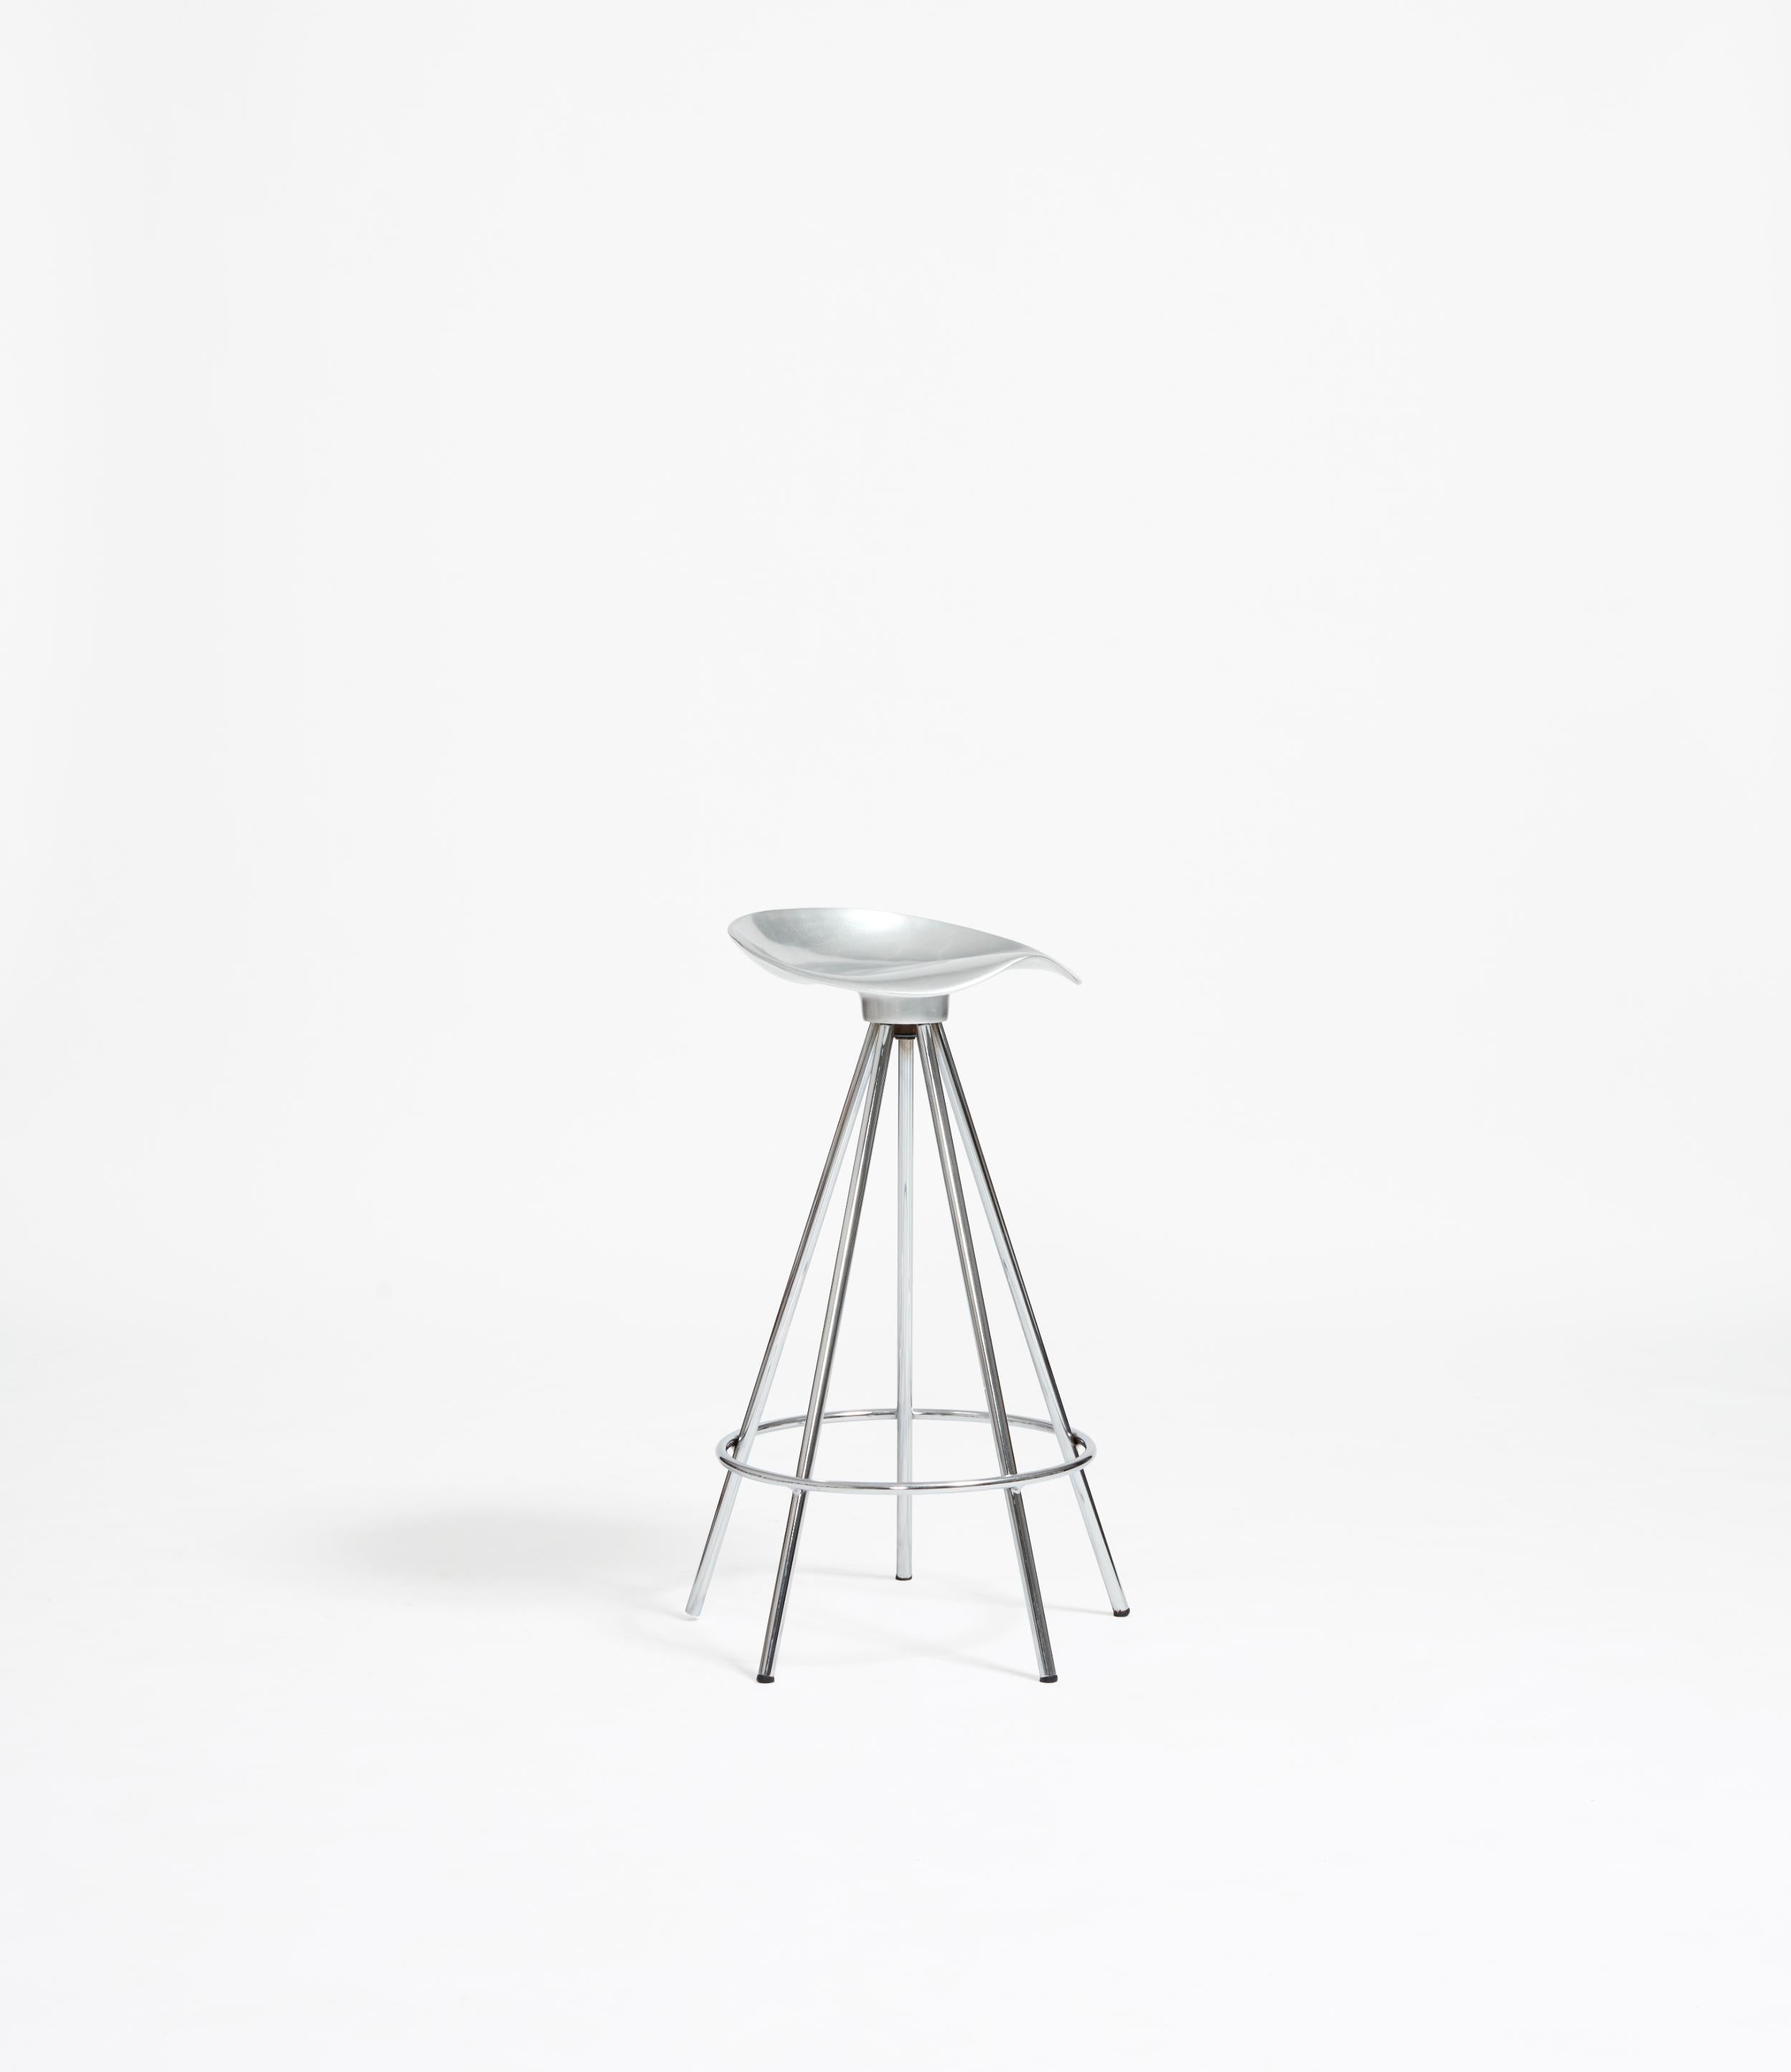 Post-Modern Polished Aluminium Jamaica Stools by Pepe Cortés For Sale